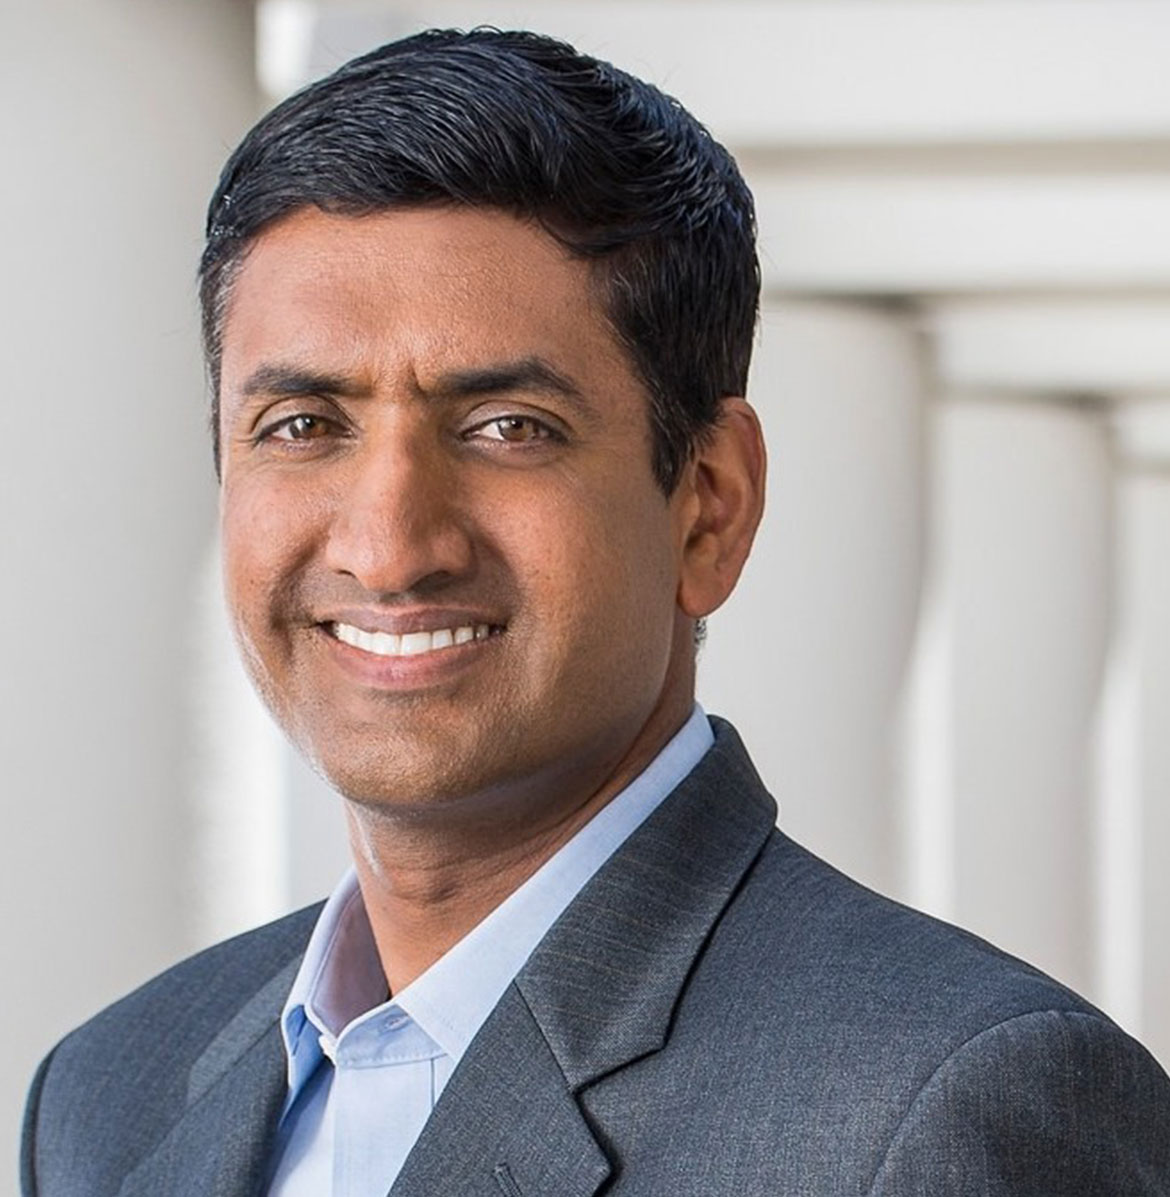 Ro Khanna is endorsed by Food & Water Action for his commitment to environmental justice.